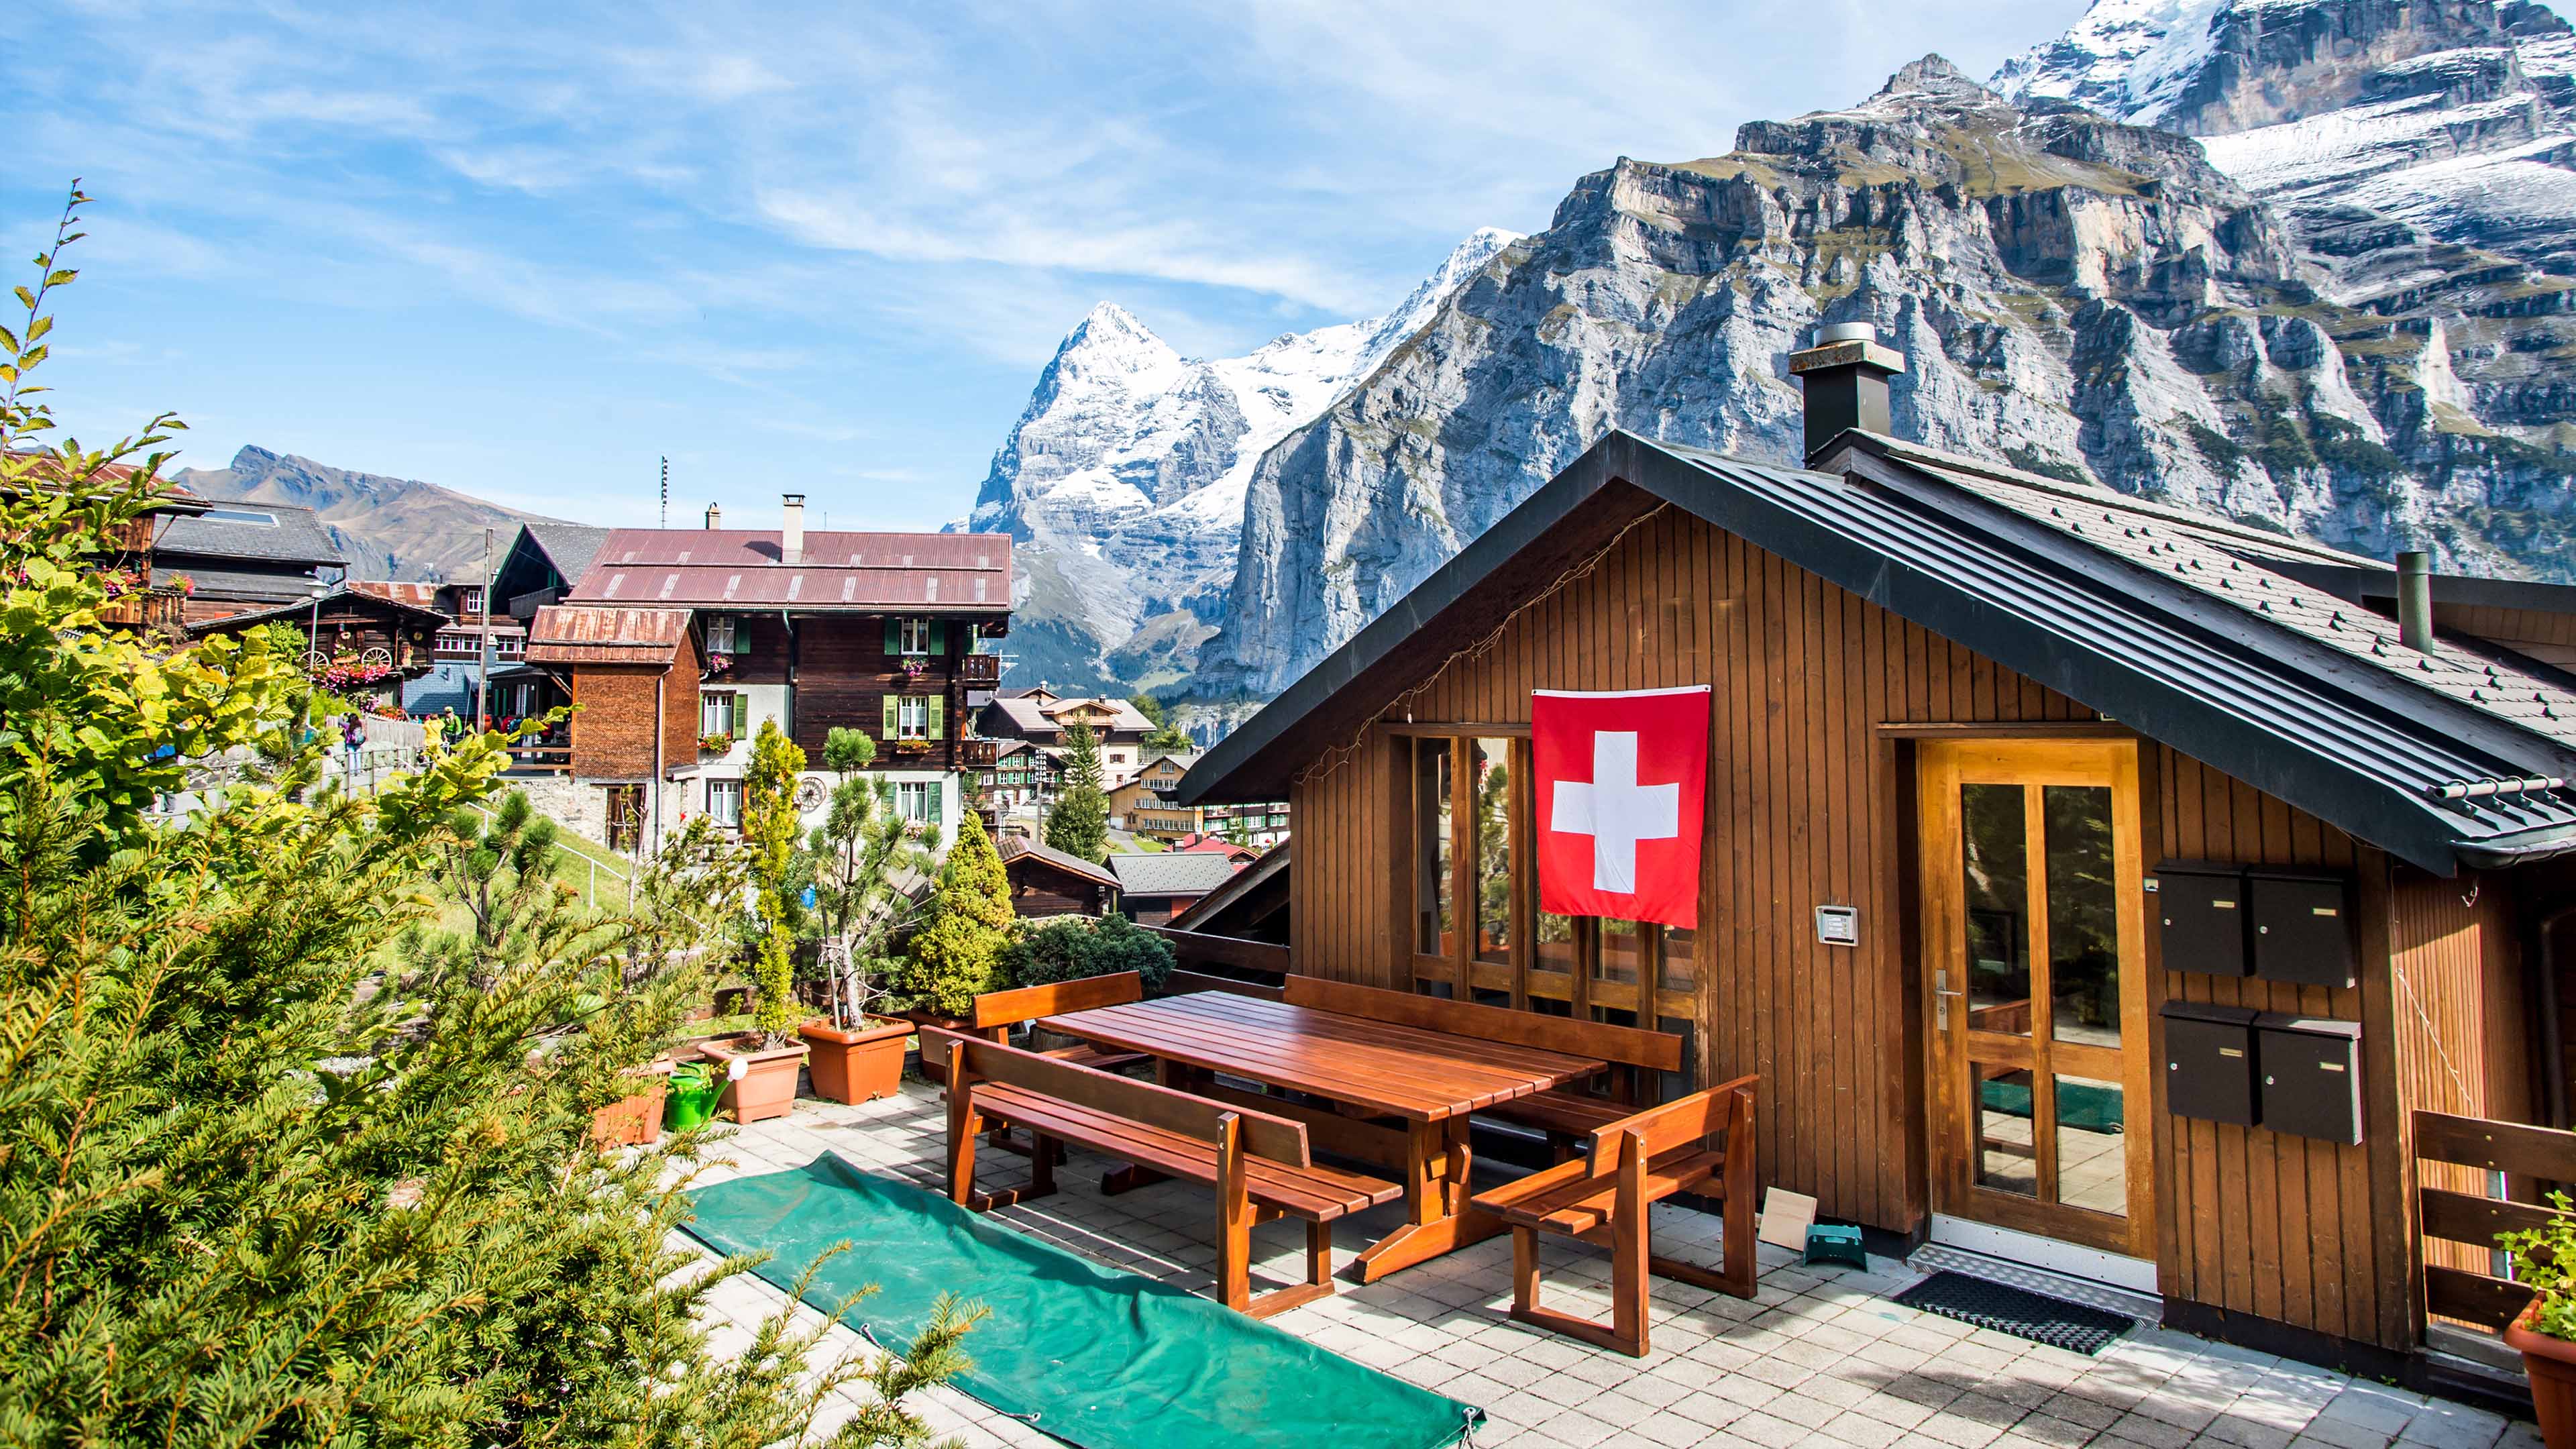 Swiss flag on wooden chalet in Switzerland with snowy mountain backdrop